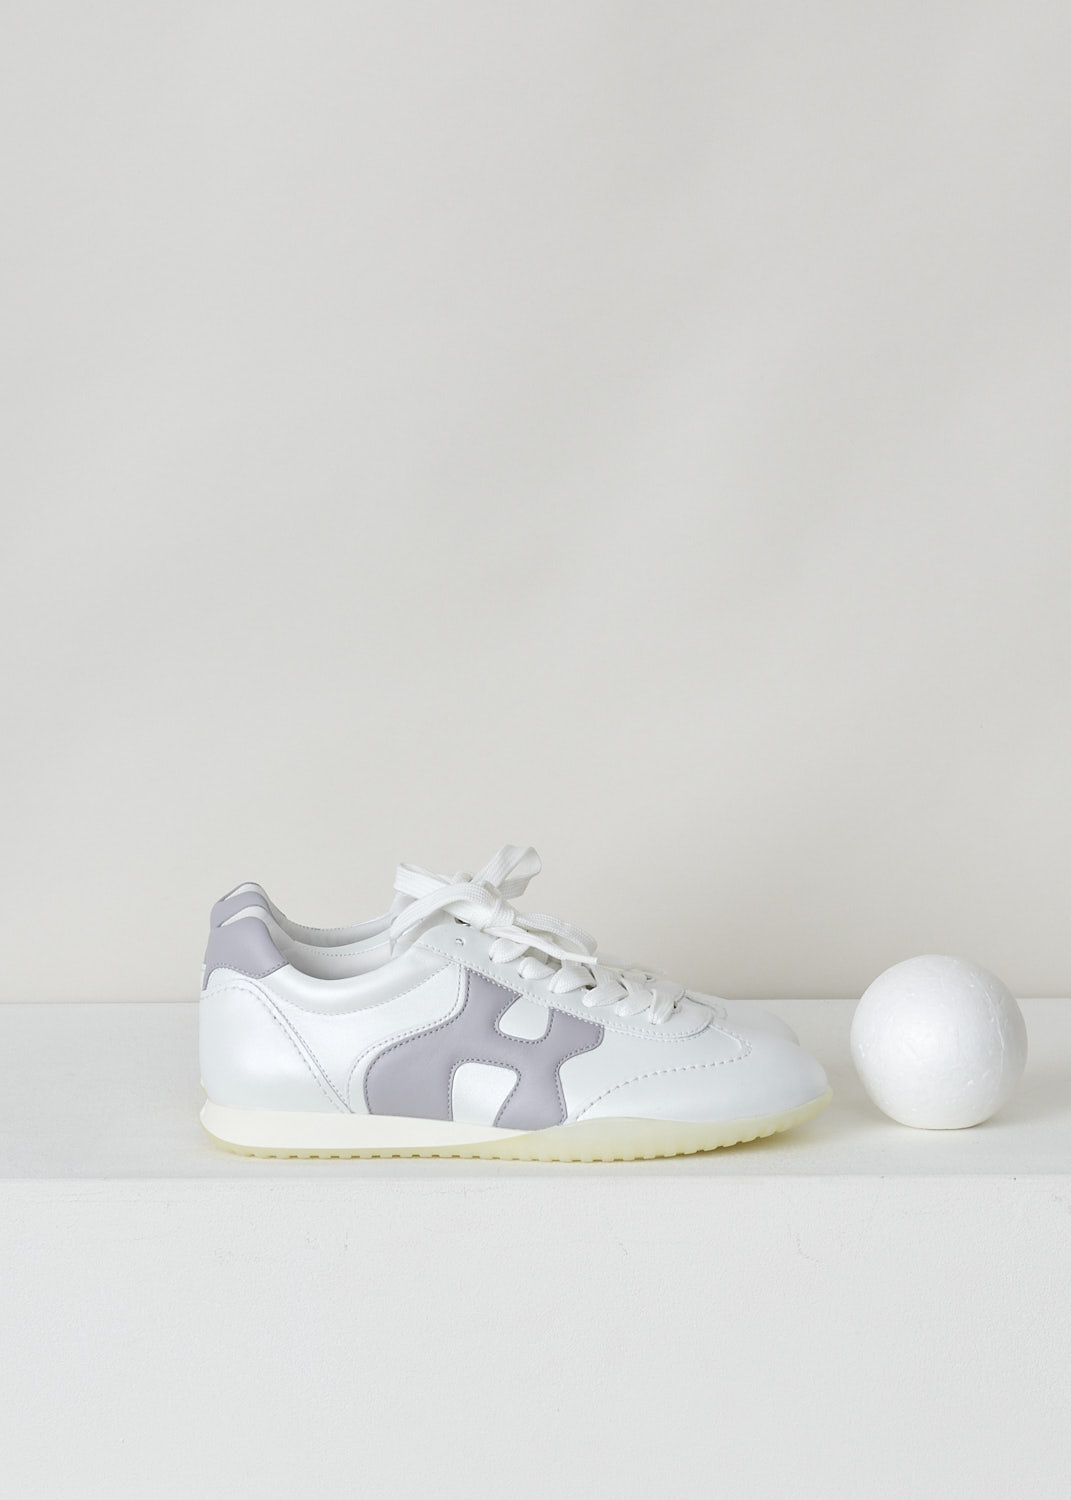 HOGAN, IRIDESCENT WHITE LOW TOP SNEAKERS WITH PURPLE H, HXW5650DO00POX0RAY_OLIMPIA_X_ALLACCIATO, White, Purple, Side, These iridescent white low top sneakers feature front lace-up fastening with white laces and the brand's H logo on the sides in a contrasting purple color. The heel tab is the same purple color. 


